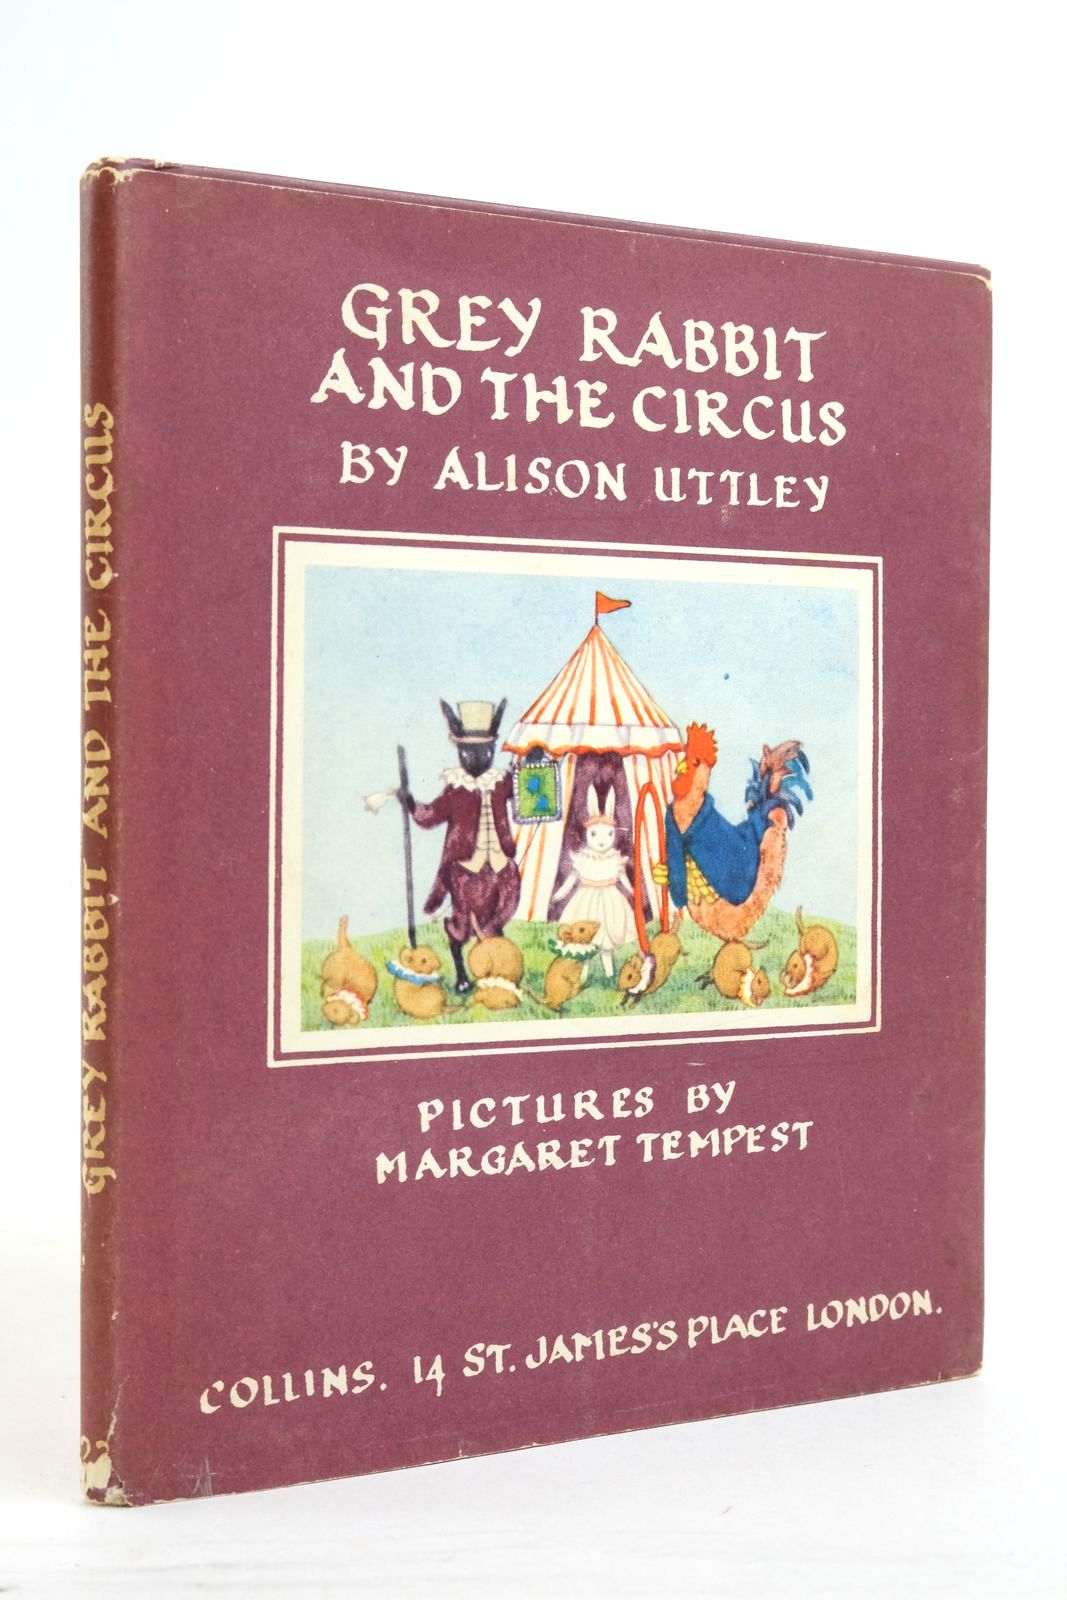 Photo of GREY RABBIT AND THE CIRCUS written by Uttley, Alison illustrated by Tempest, Margaret published by Collins (STOCK CODE: 2136891)  for sale by Stella & Rose's Books